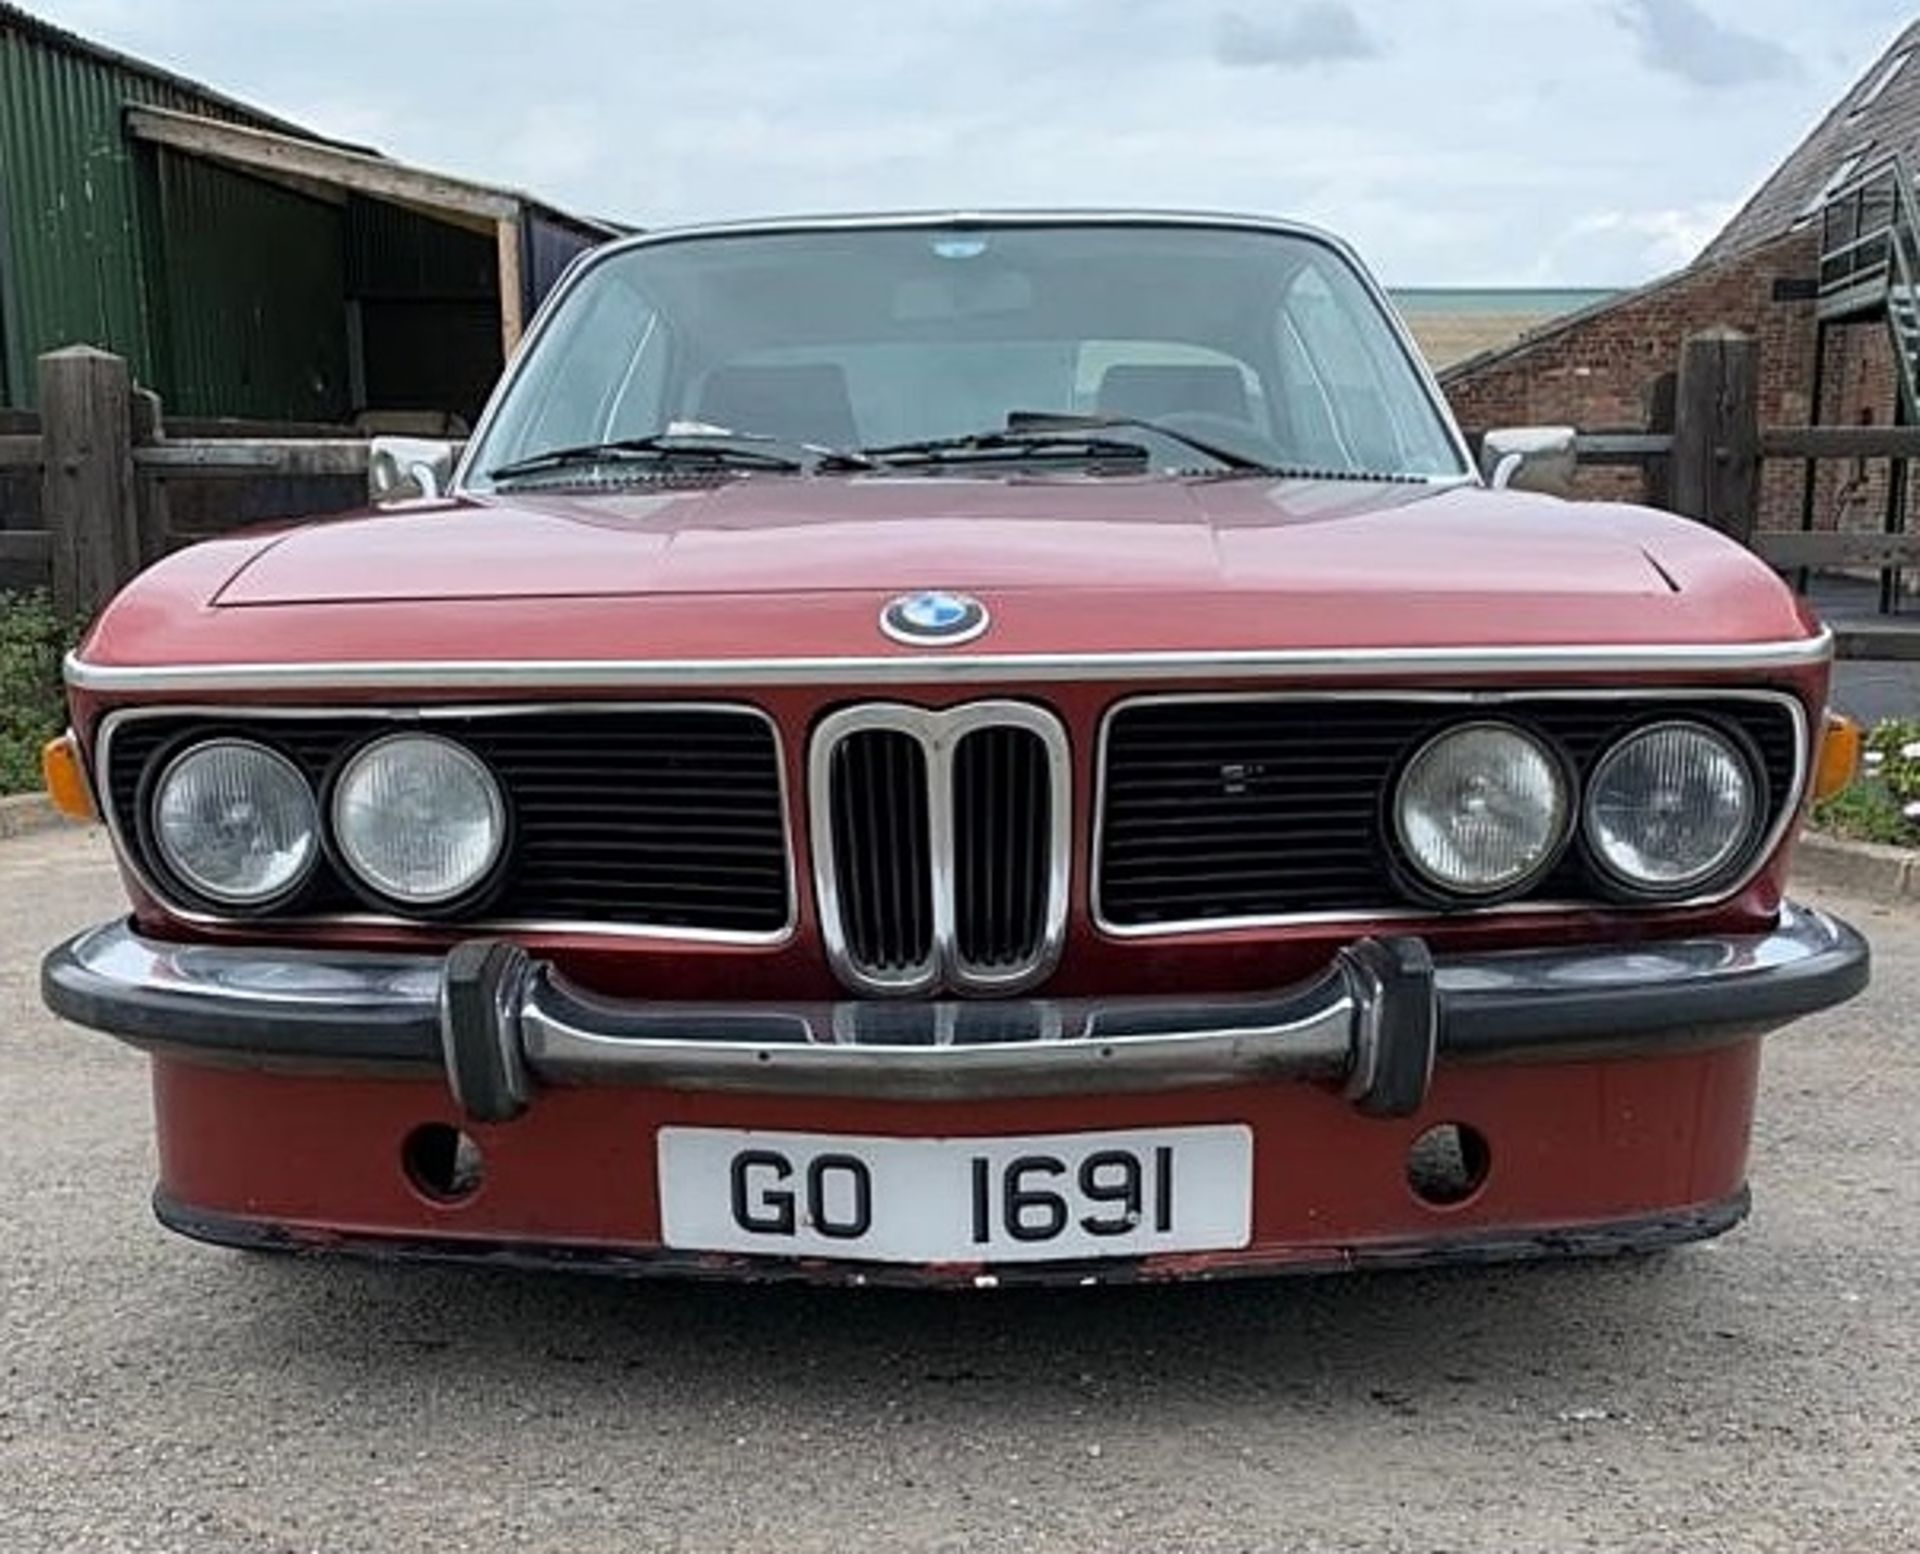 1 x BMW E9 2500 CSA Classic Car - Ultra Rare Example - CL022 - Location: Wilmslow, Cheshire - Image 2 of 29